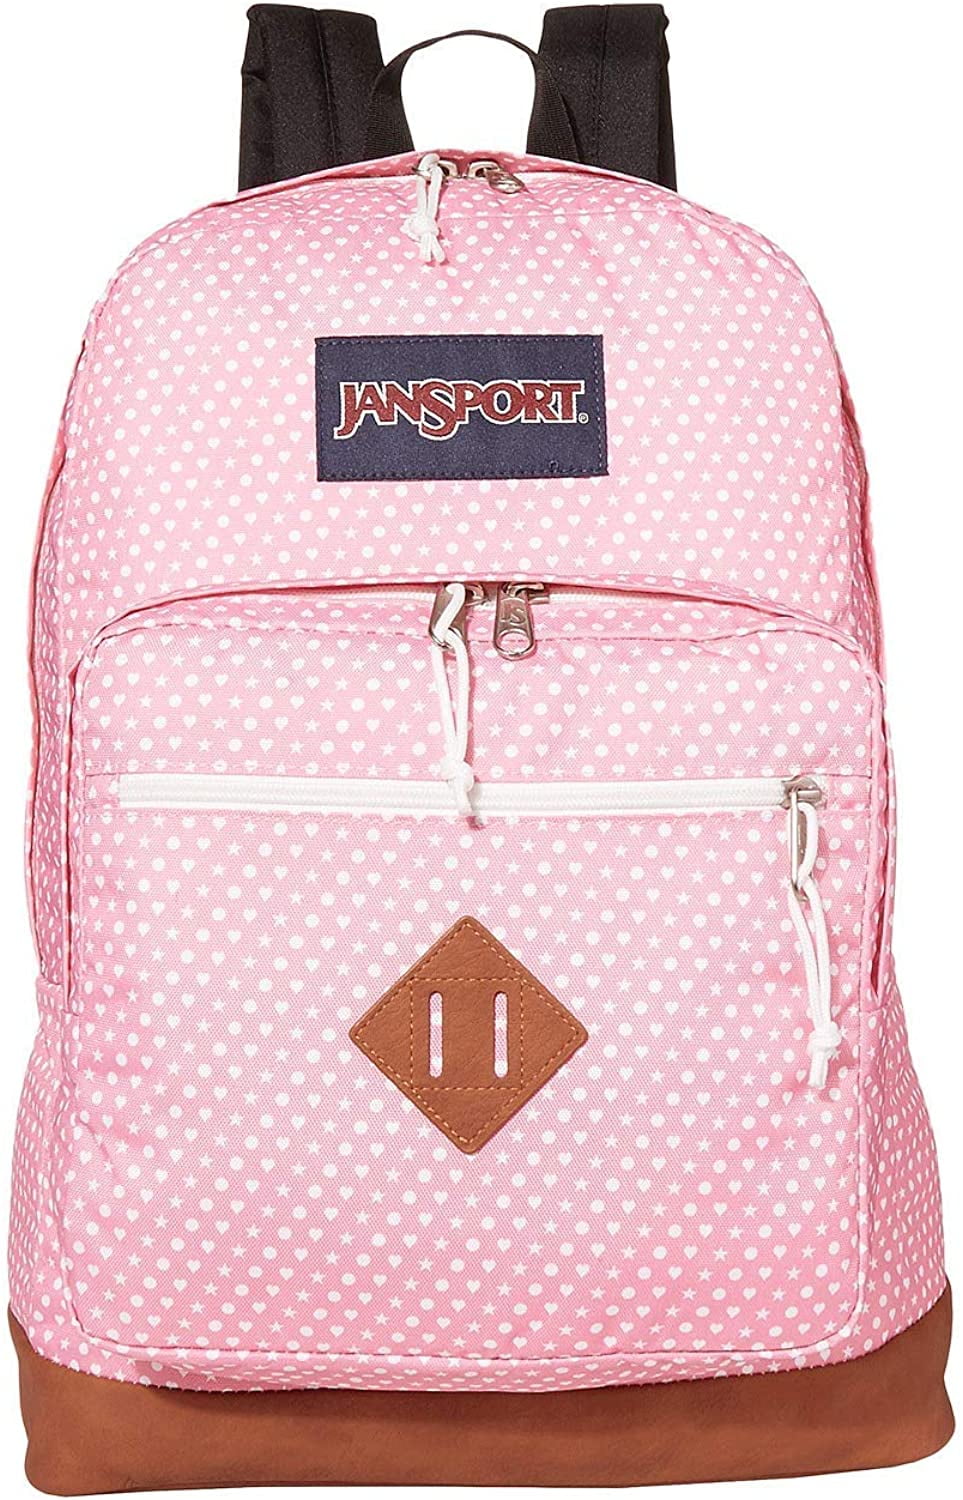 Jansport CITY VIEW GRADIENT HIBISCUS BUTTERFLY GIRLS BACKPACK BOOK  LAPTOP BAG 